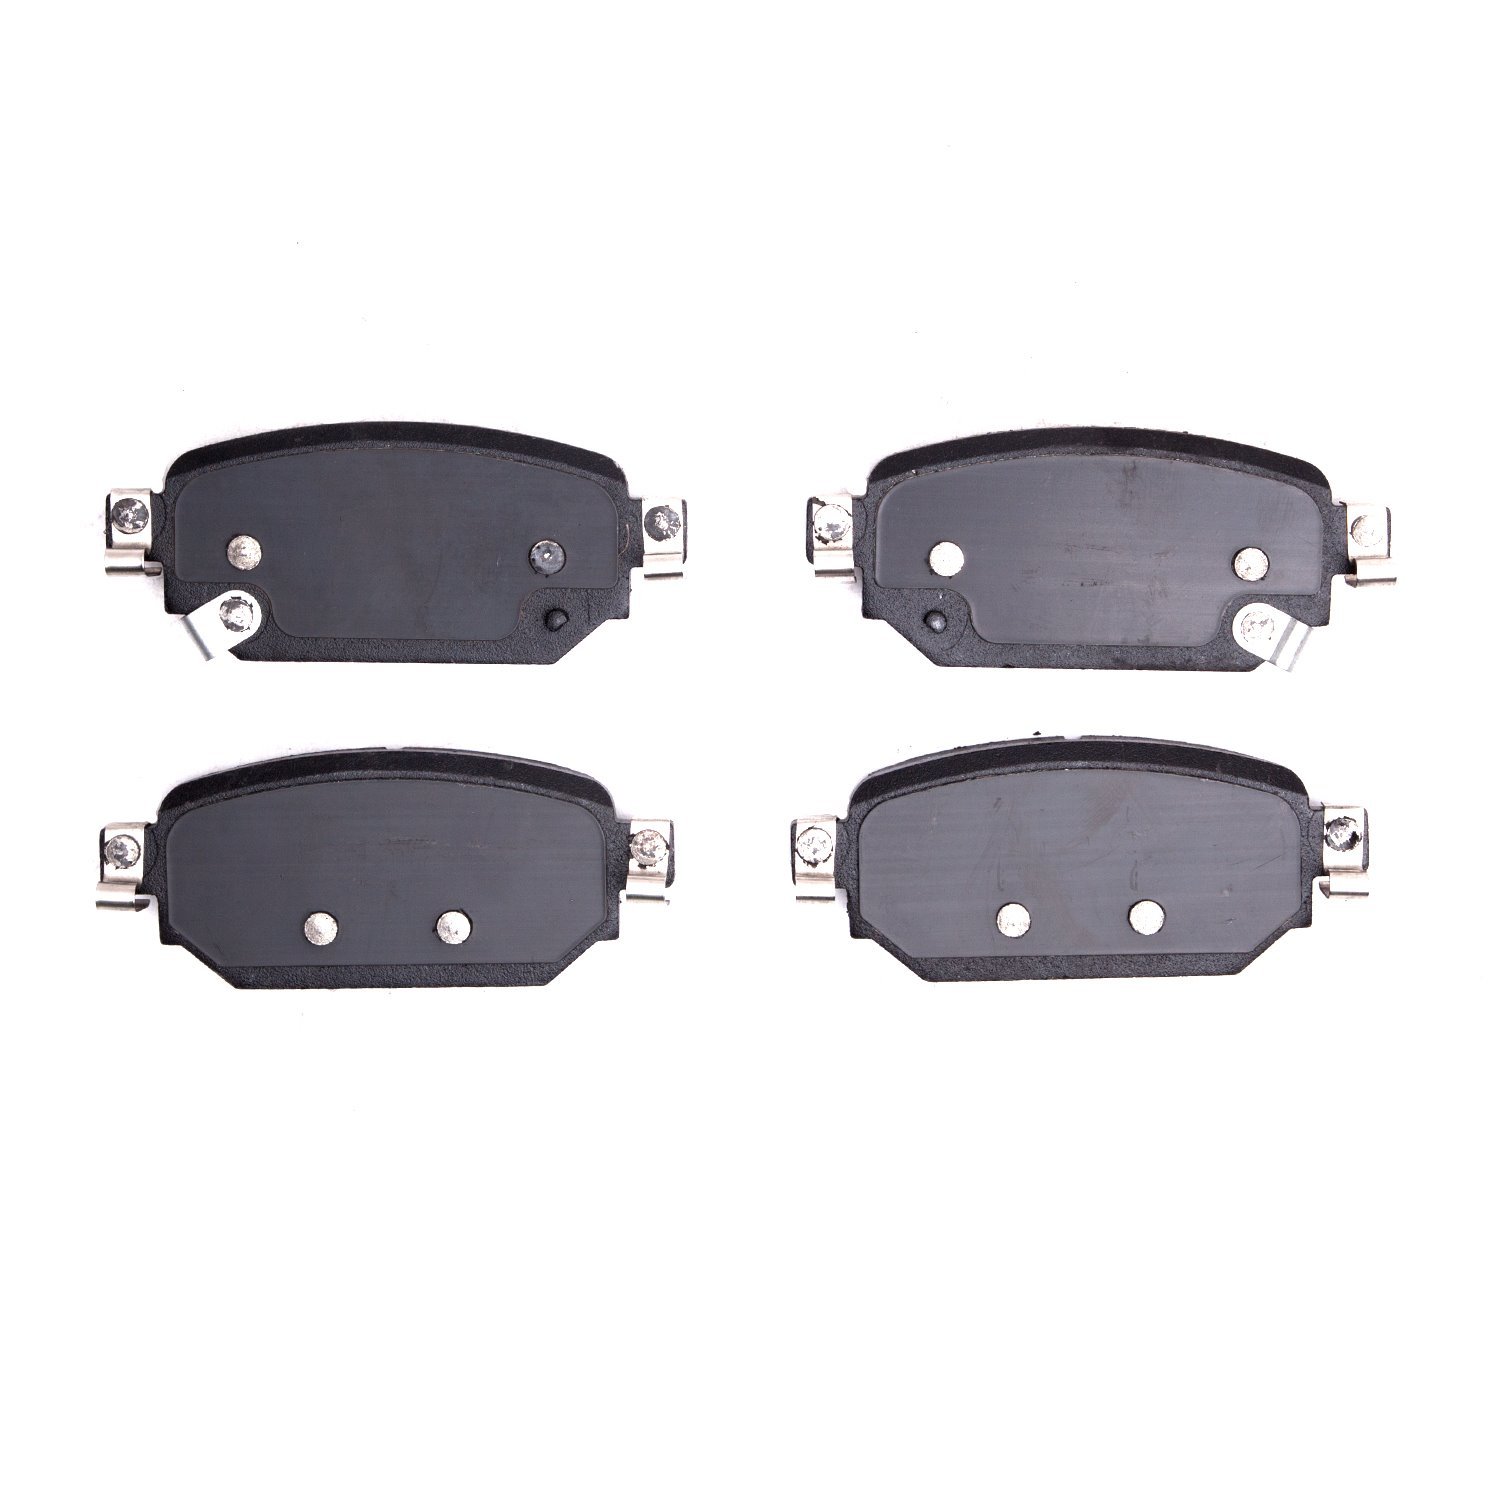 1551-2042-00 5000 Advanced Ceramic Brake Pads, Fits Select Ford/Lincoln/Mercury/Mazda, Position: Rear